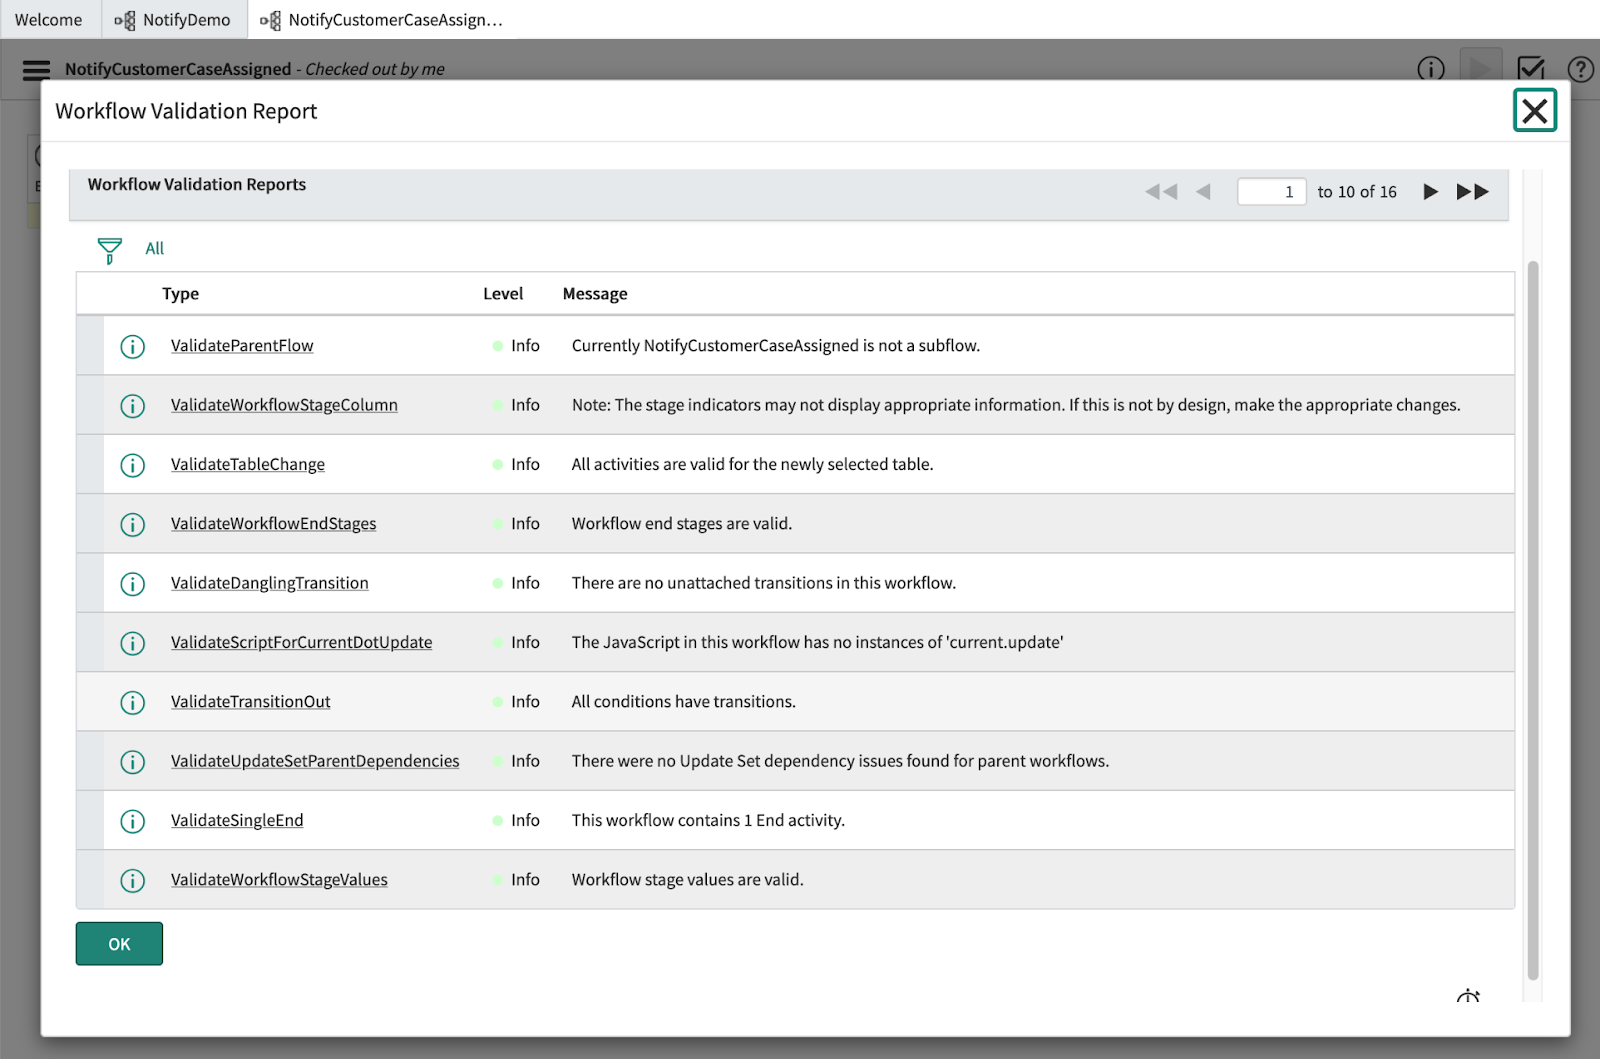 A screenshot of the Workflow Validation Report